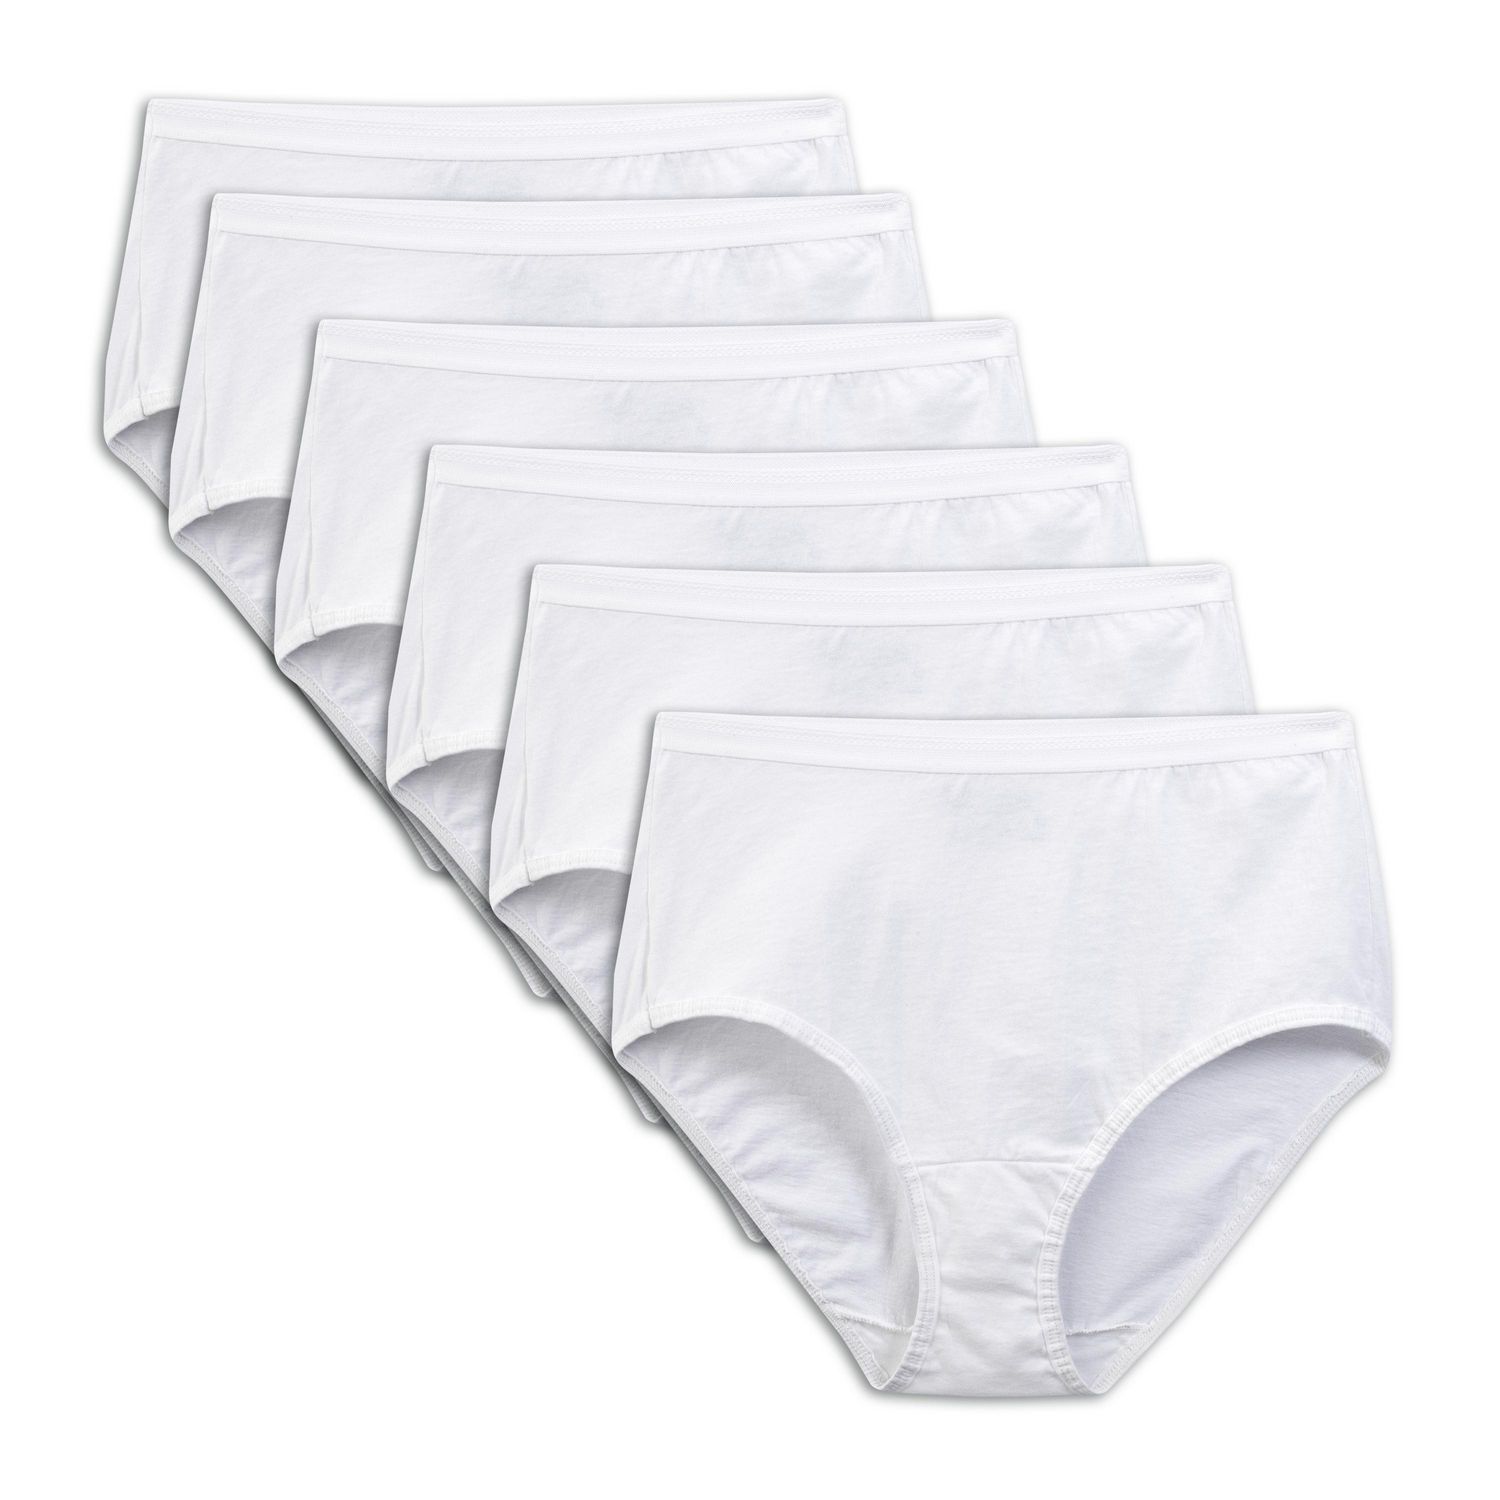 Fruit of the Loom Ladies White Cotton Briefs, 6-Pack 